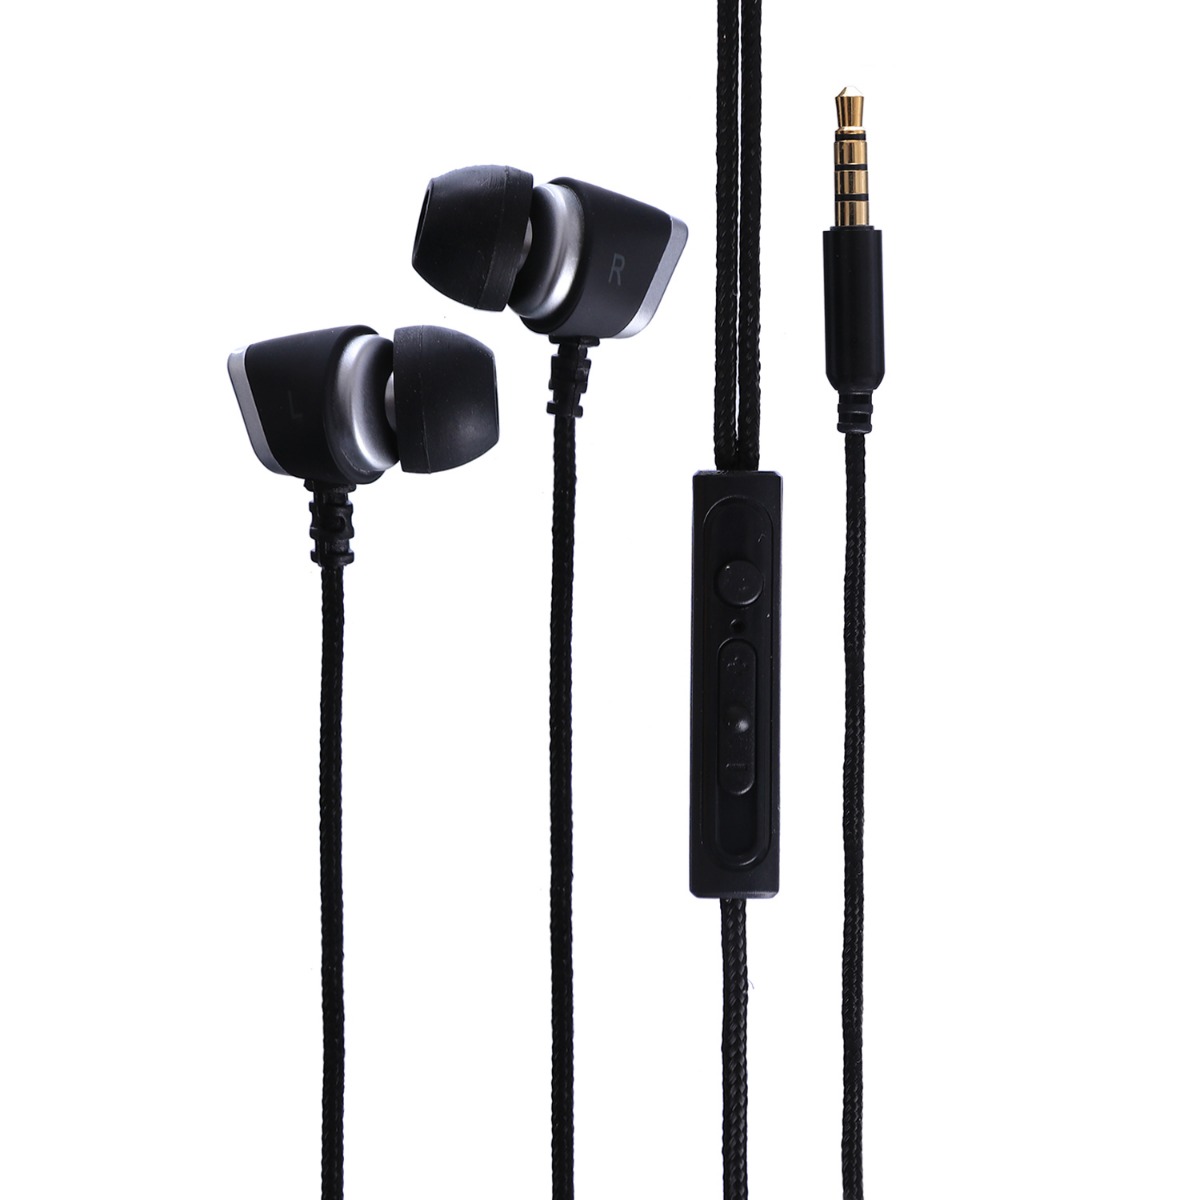 Porsh Dob In-Ear Wired Earphones with Microphone, Black/Silver - E260I